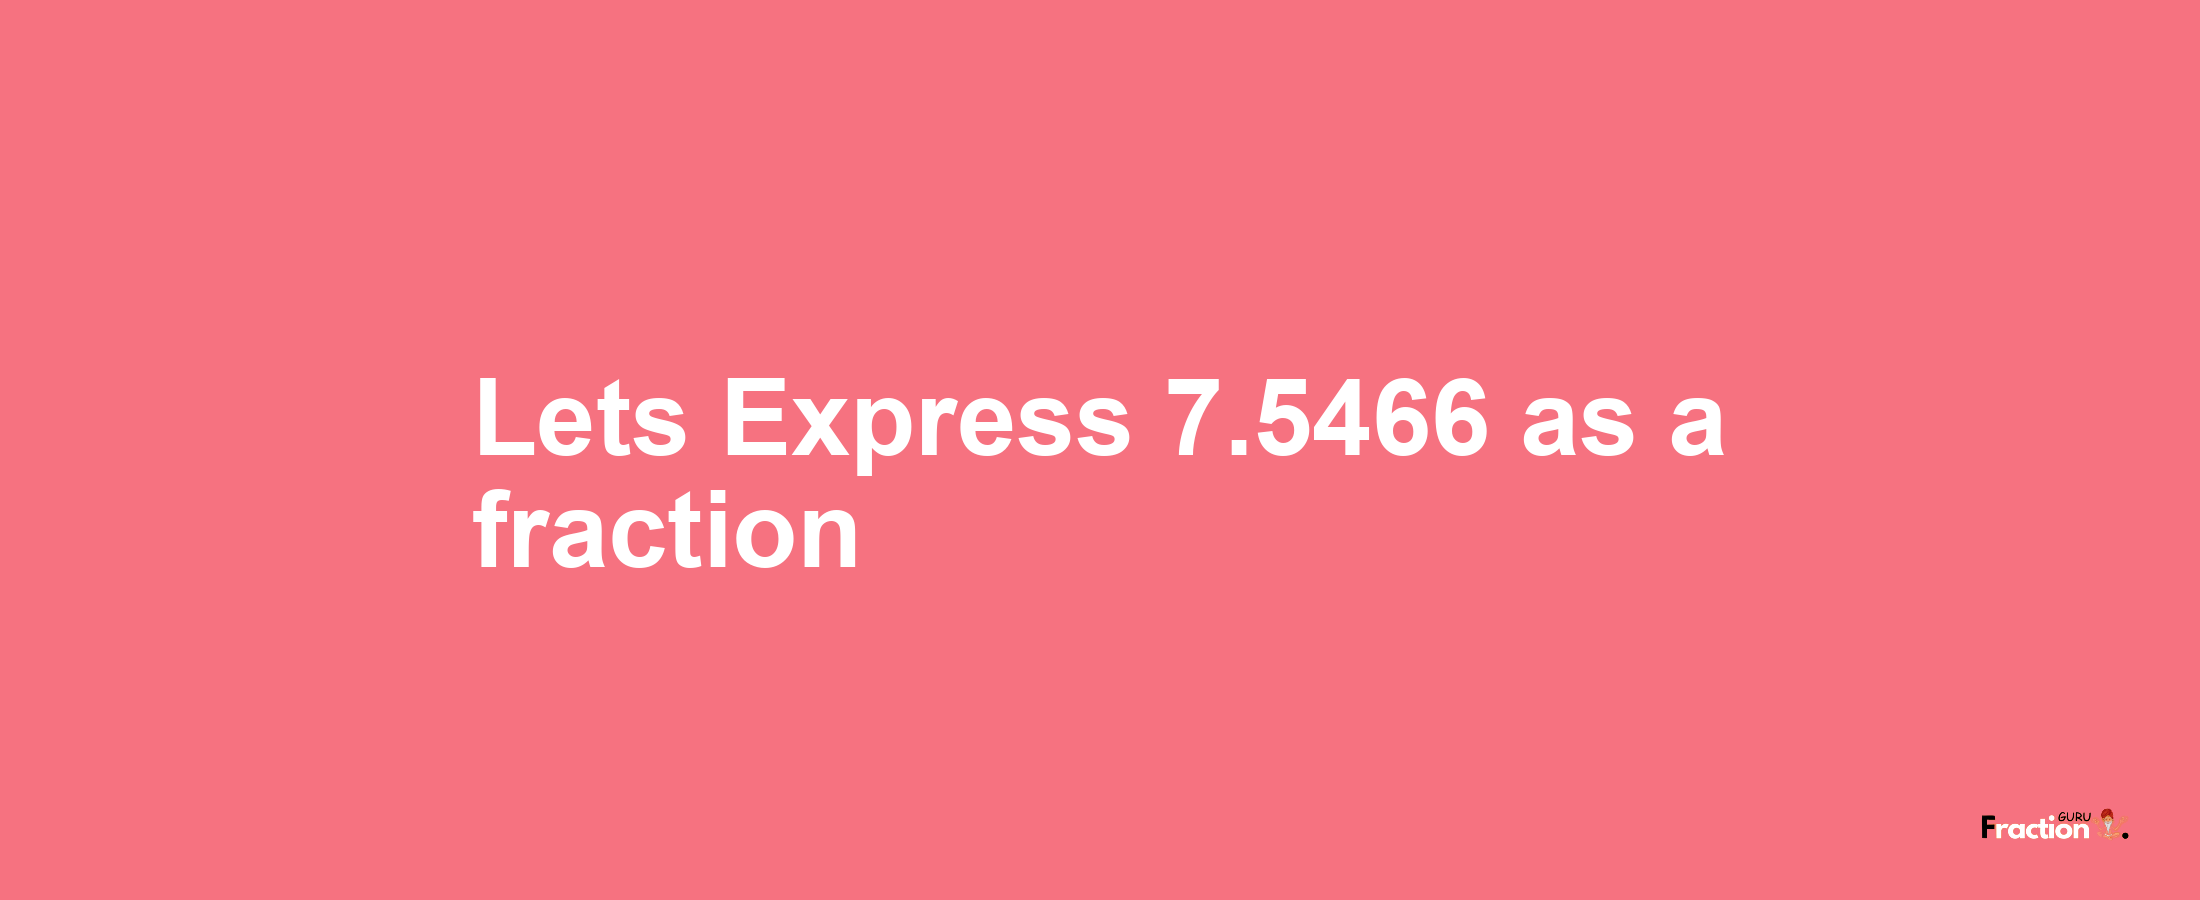 Lets Express 7.5466 as afraction